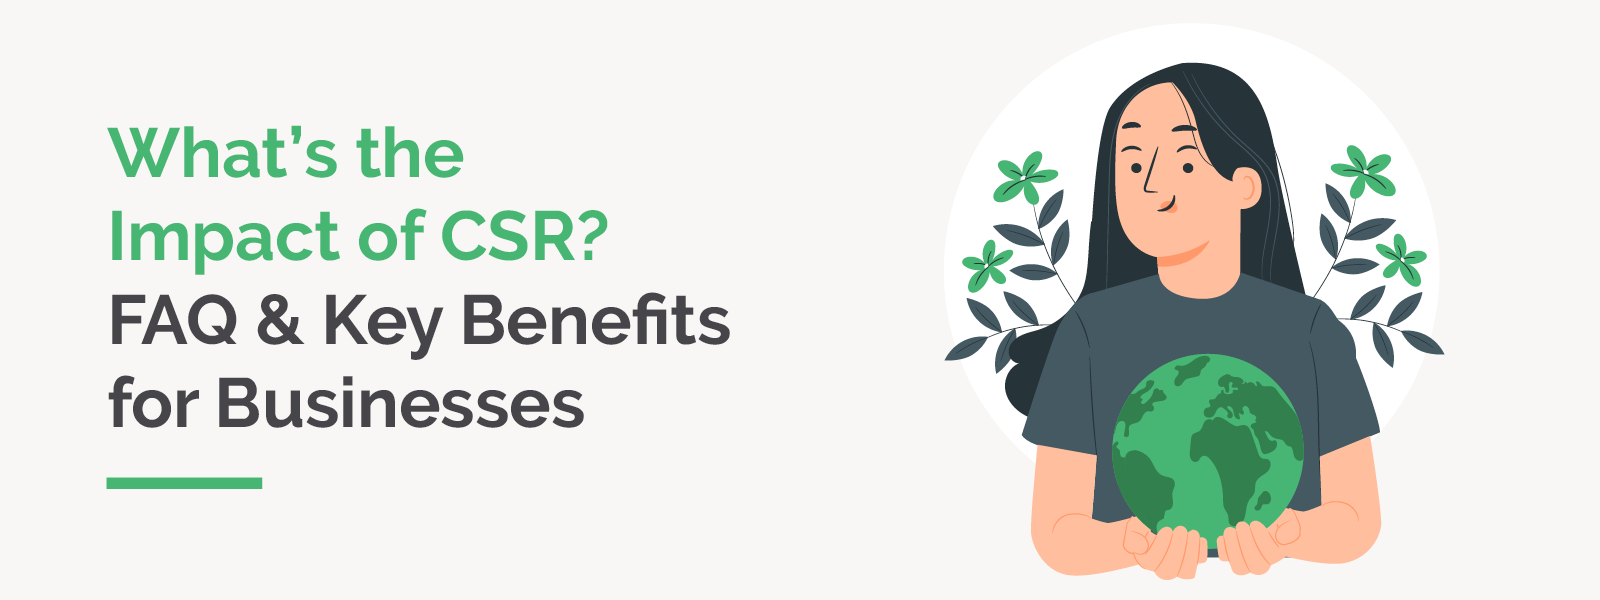 This article explores the impact of CSR, frequently asked questions, and key benefits for businesses.